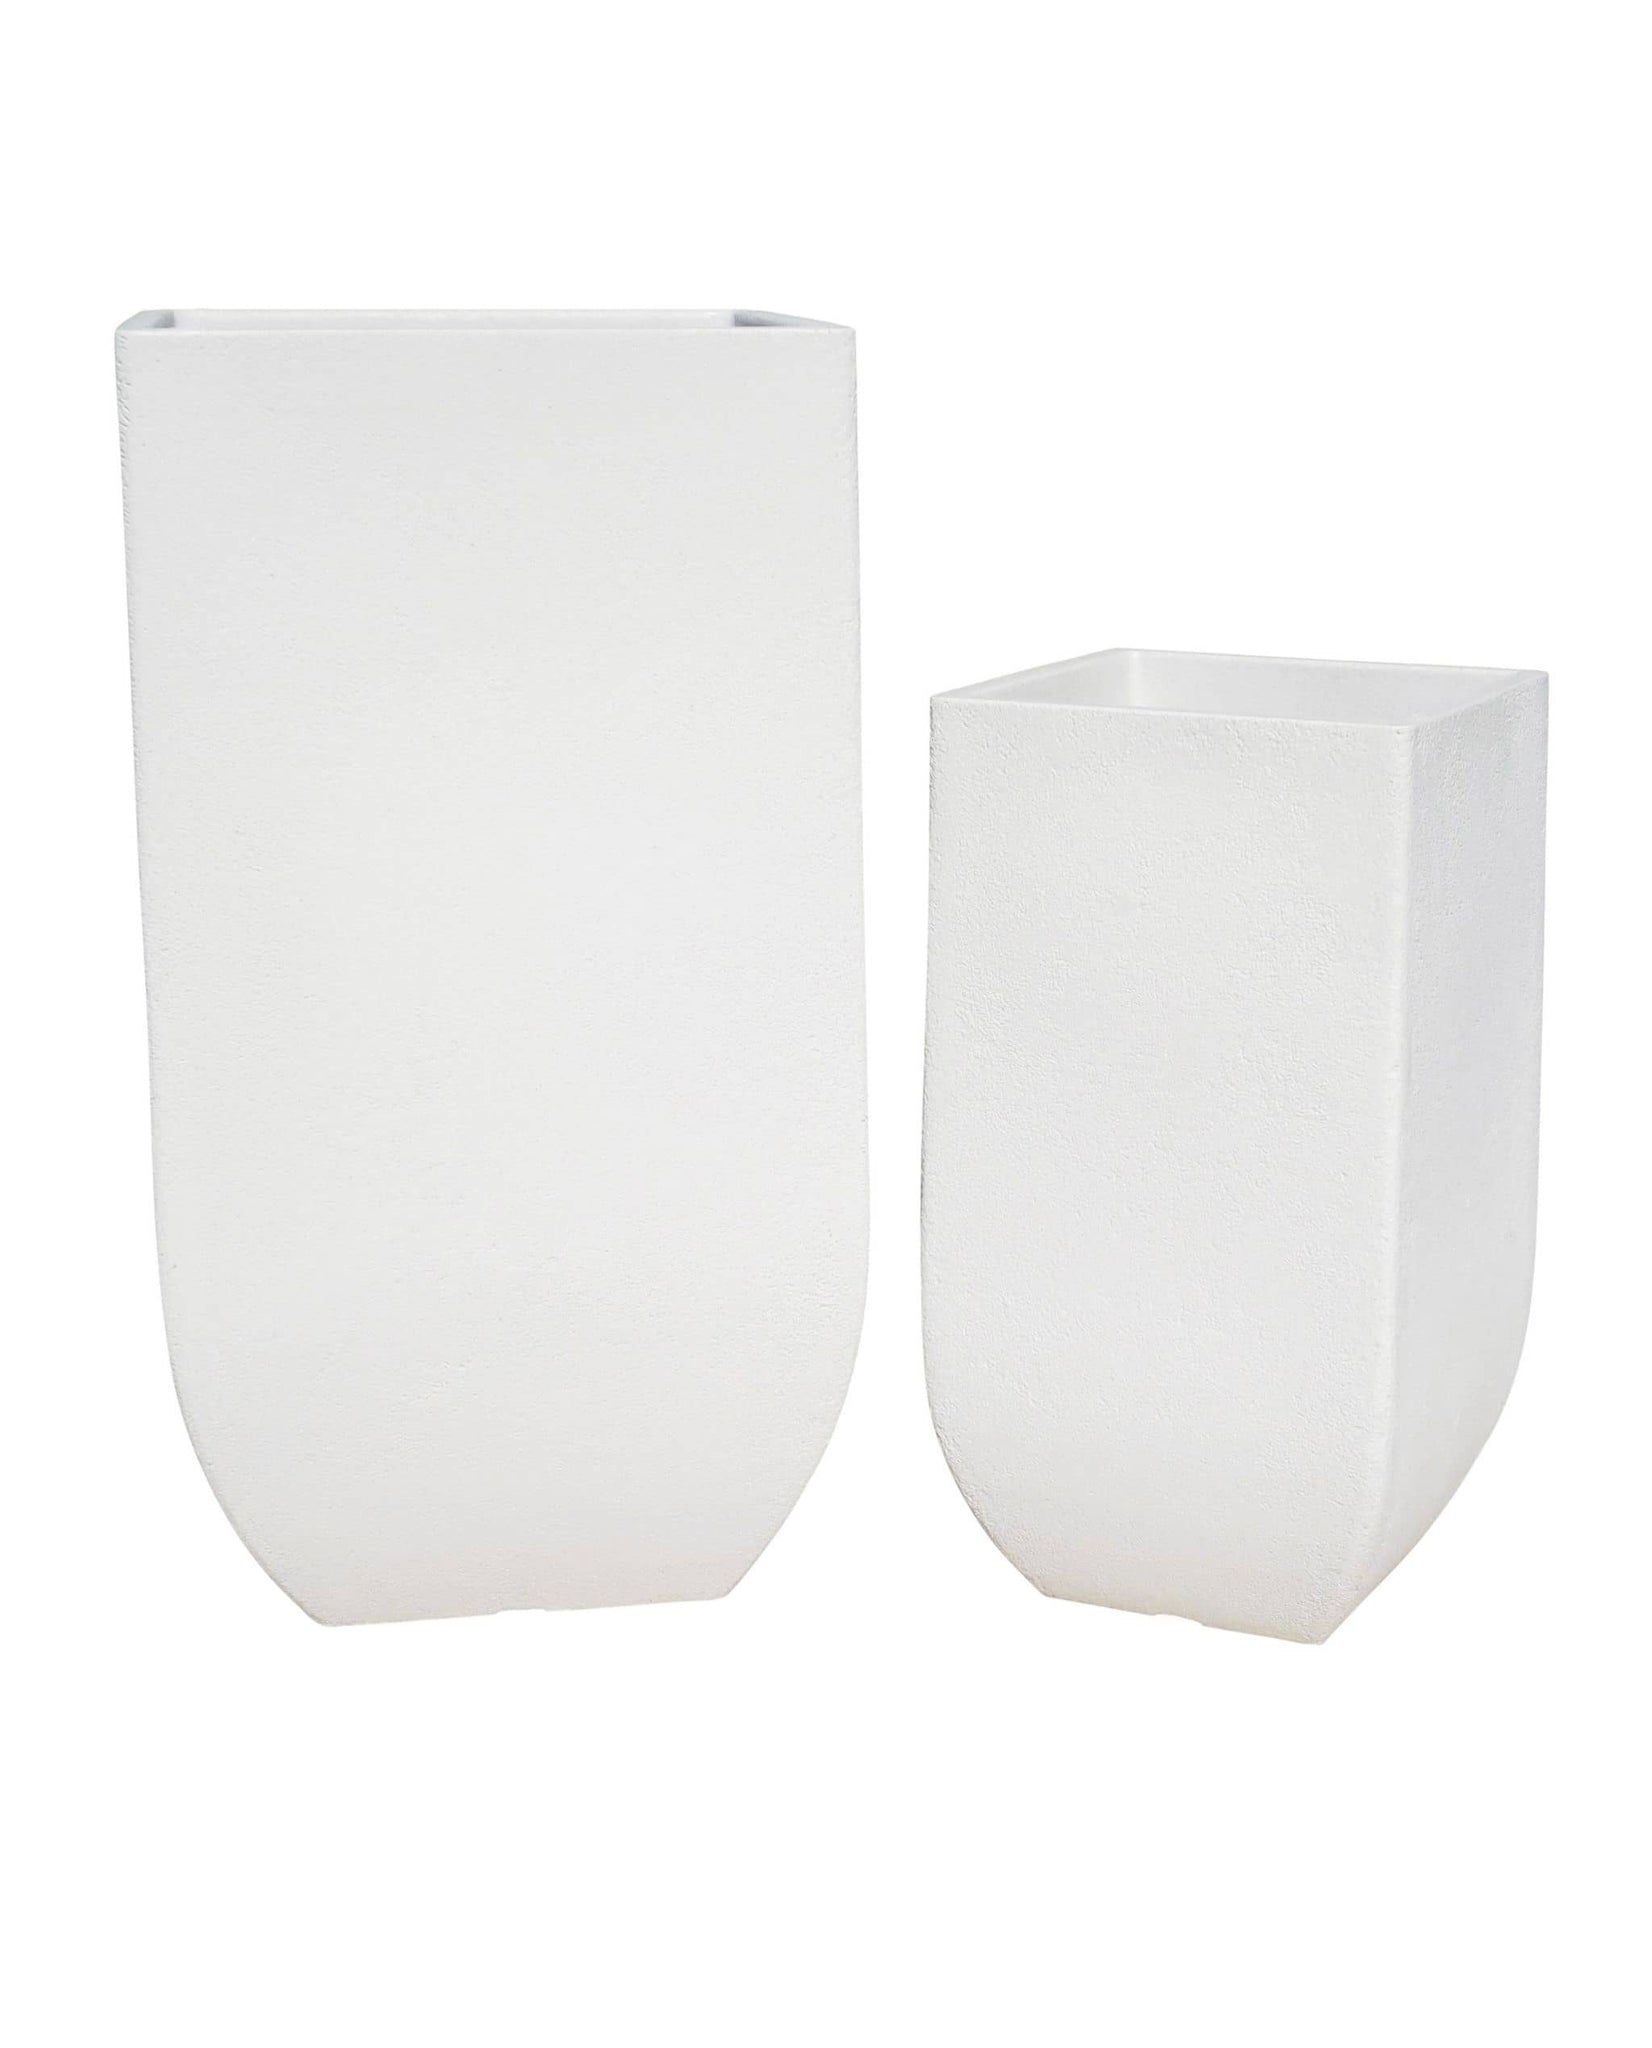 slight angled view of the small and large Japi verticale square planters side by side, tall, upright, off-white.